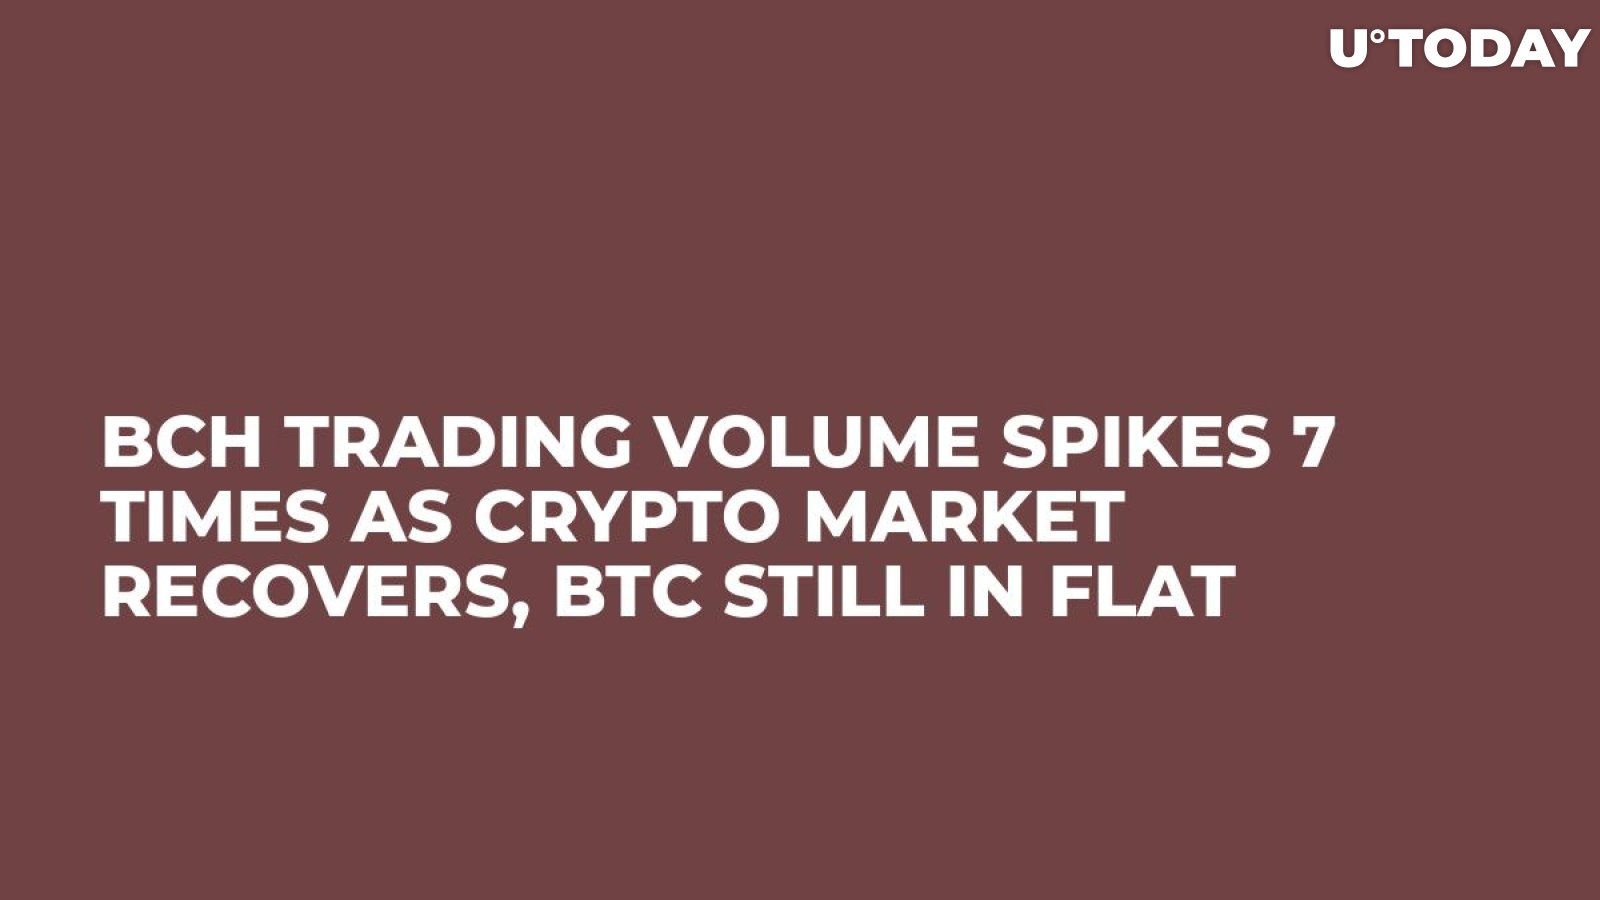 BCH Trading Volume Spikes 7 Times As Crypto Market Recovers, BTC Still in Flat